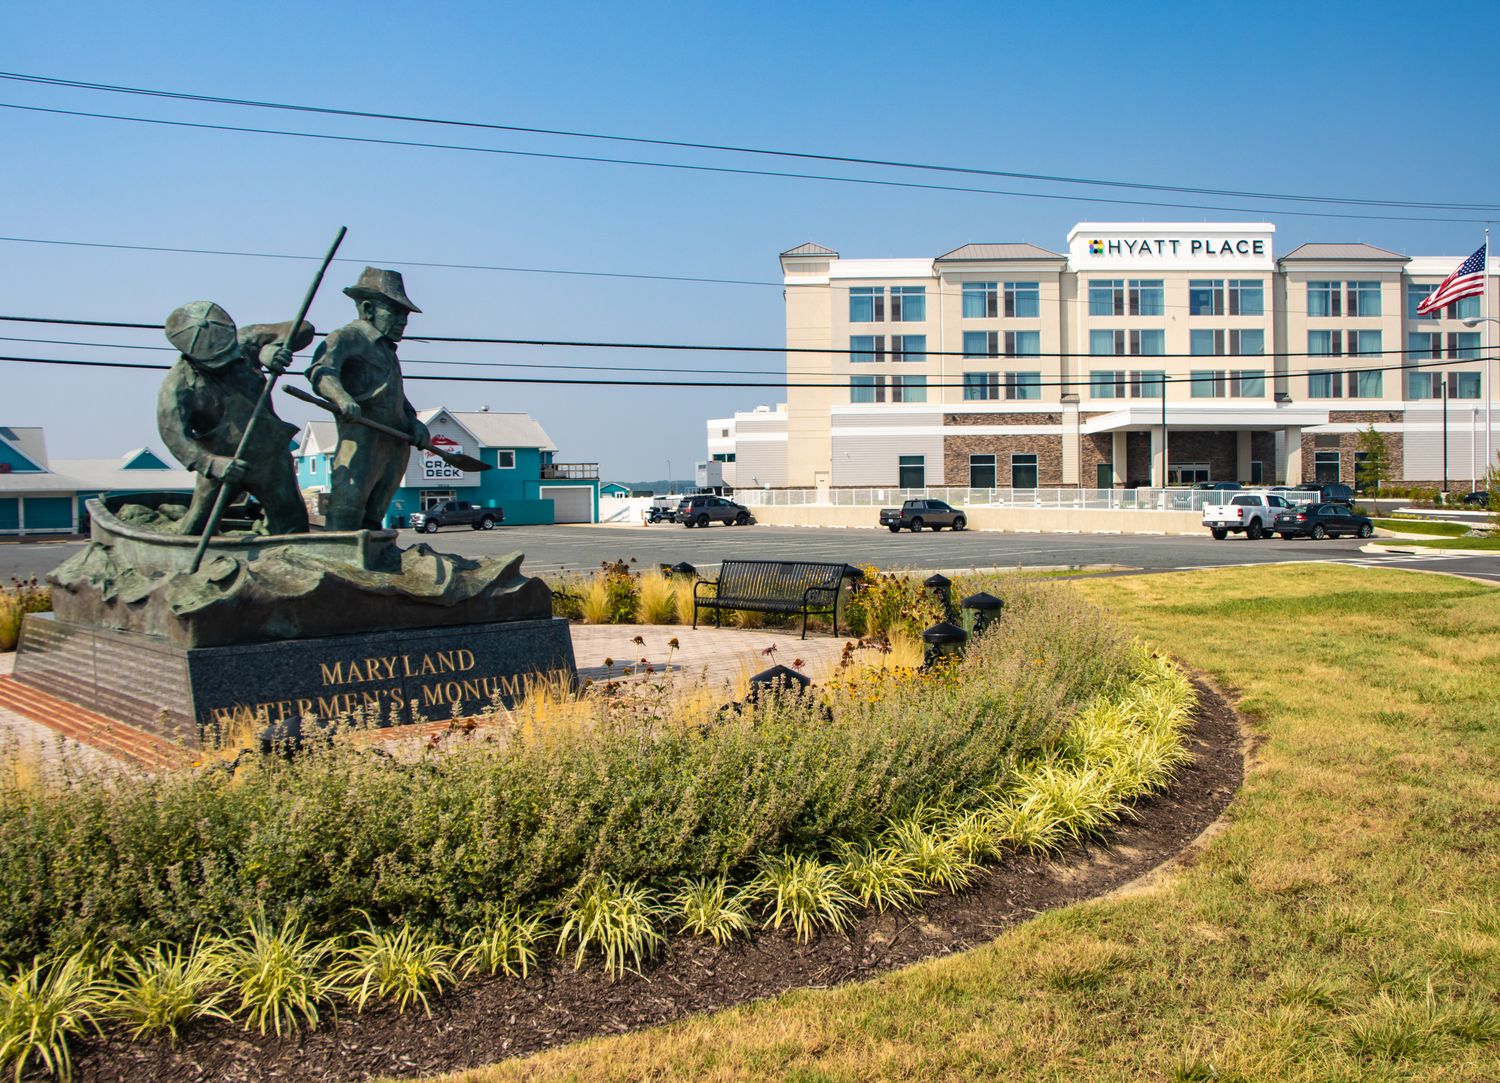 The Maryland Waterman's Monument and the Hyatt Place at the entrance of Kent Narrows, MD